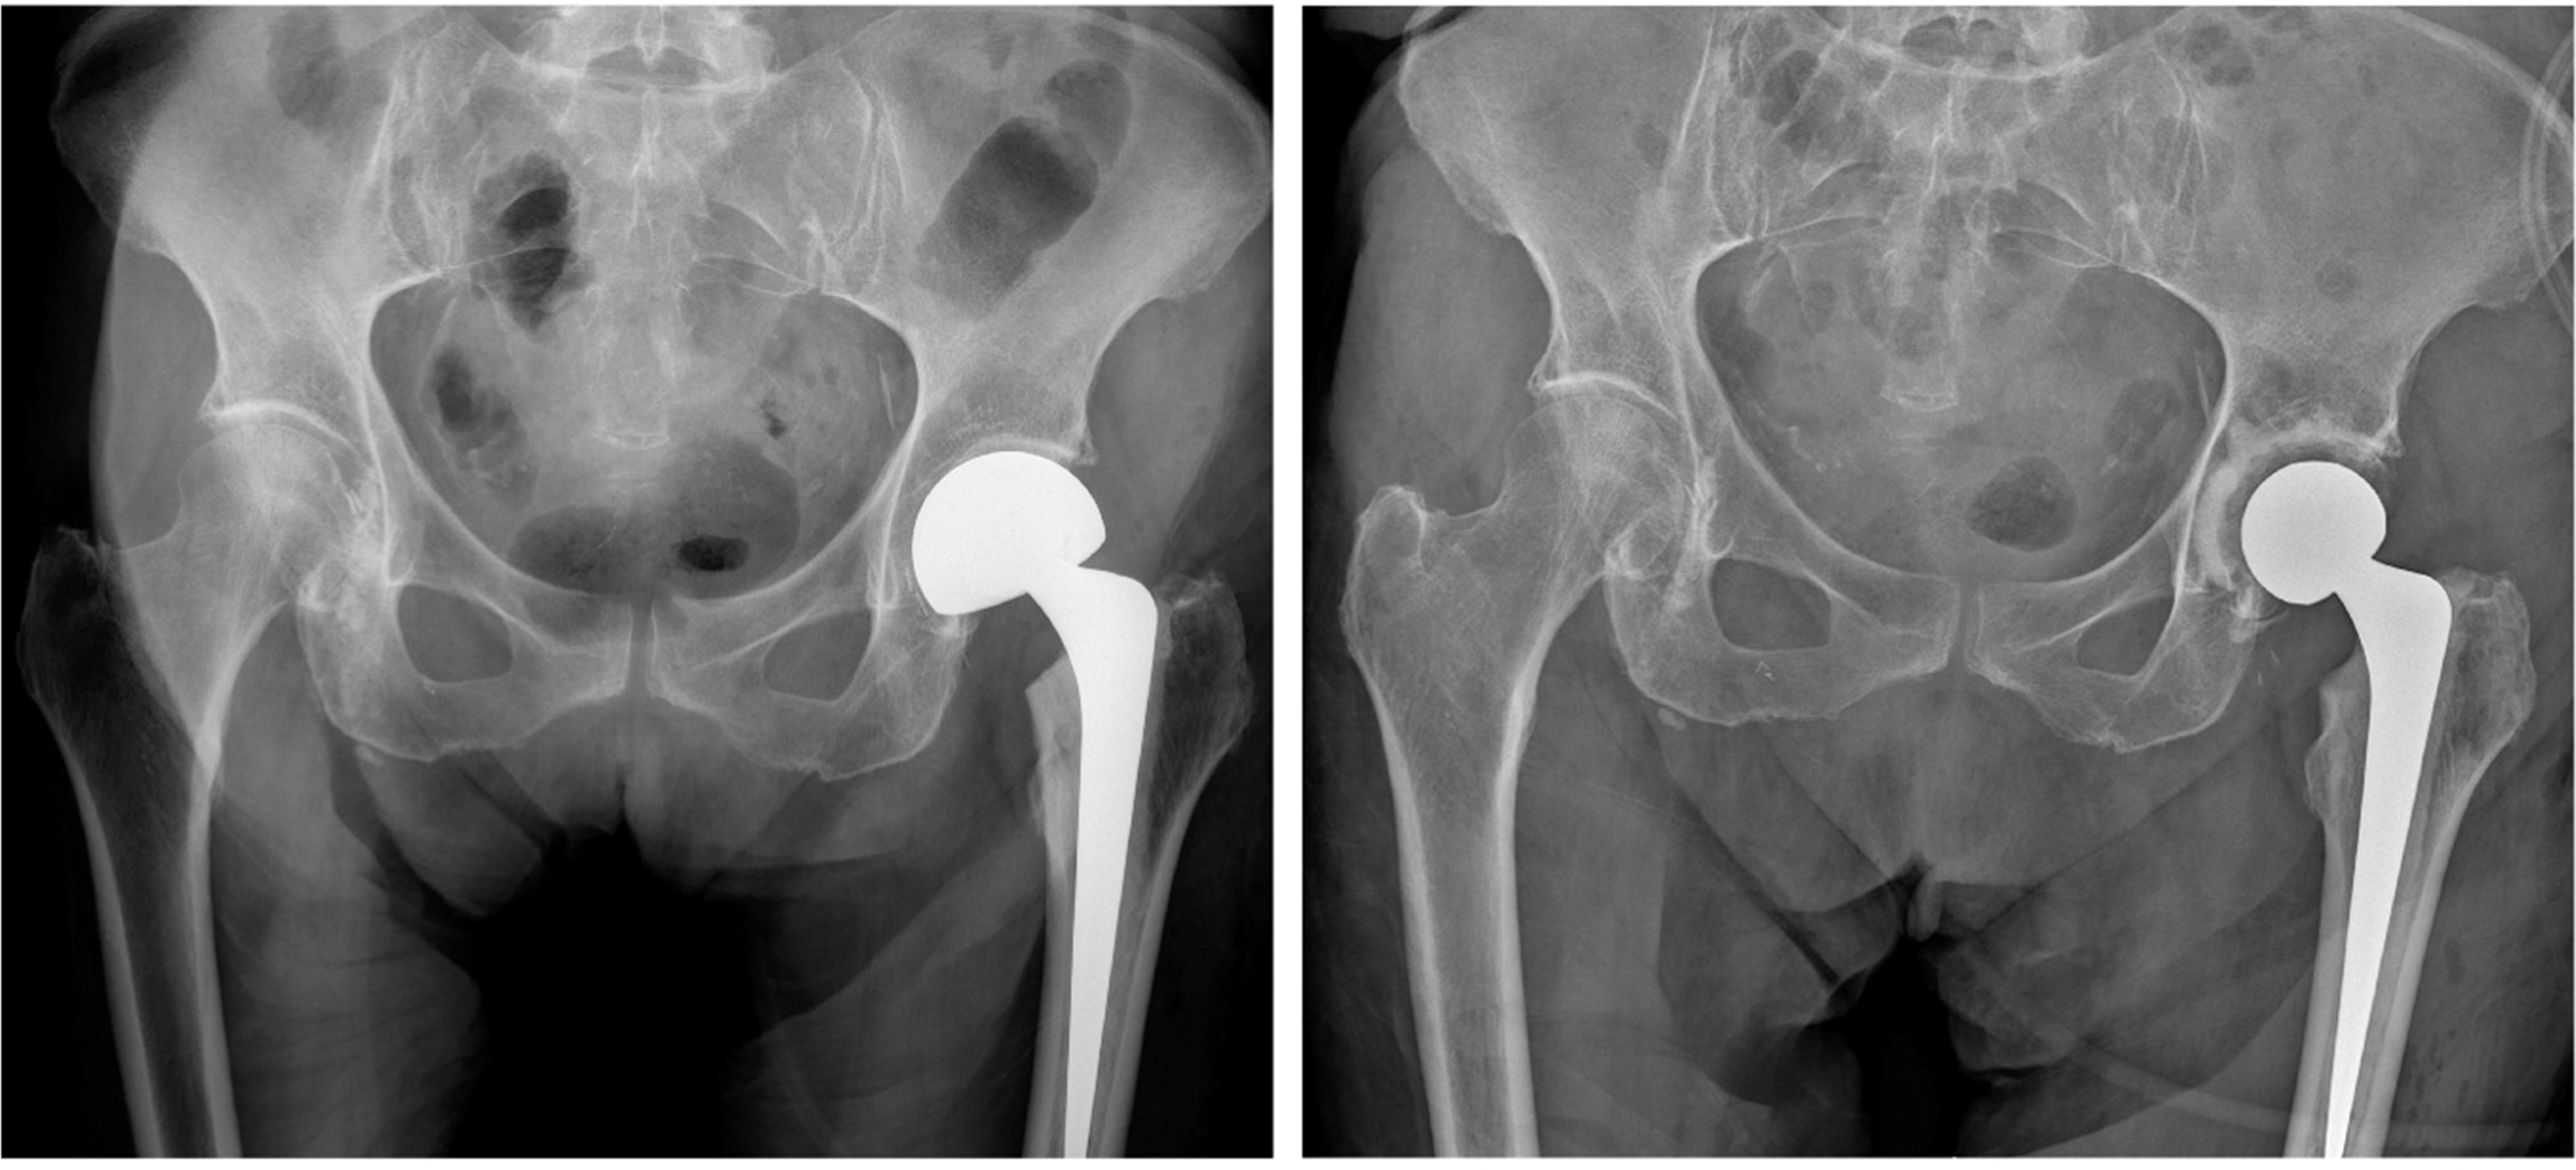 Fig. 1 
            Preoperative (left) and postoperative (right) anteroposterior radiographs of a 76-year-old female patient who underwent a single-stage revision arthroplasty with conversion to total hip arthroplsaty for a left early-onset hemiarthroplasty periprosthetic joint infection. Postoperative radiograph demonstrates a cemented acetabular polyethylene liner and revised cement femoral implant.
          